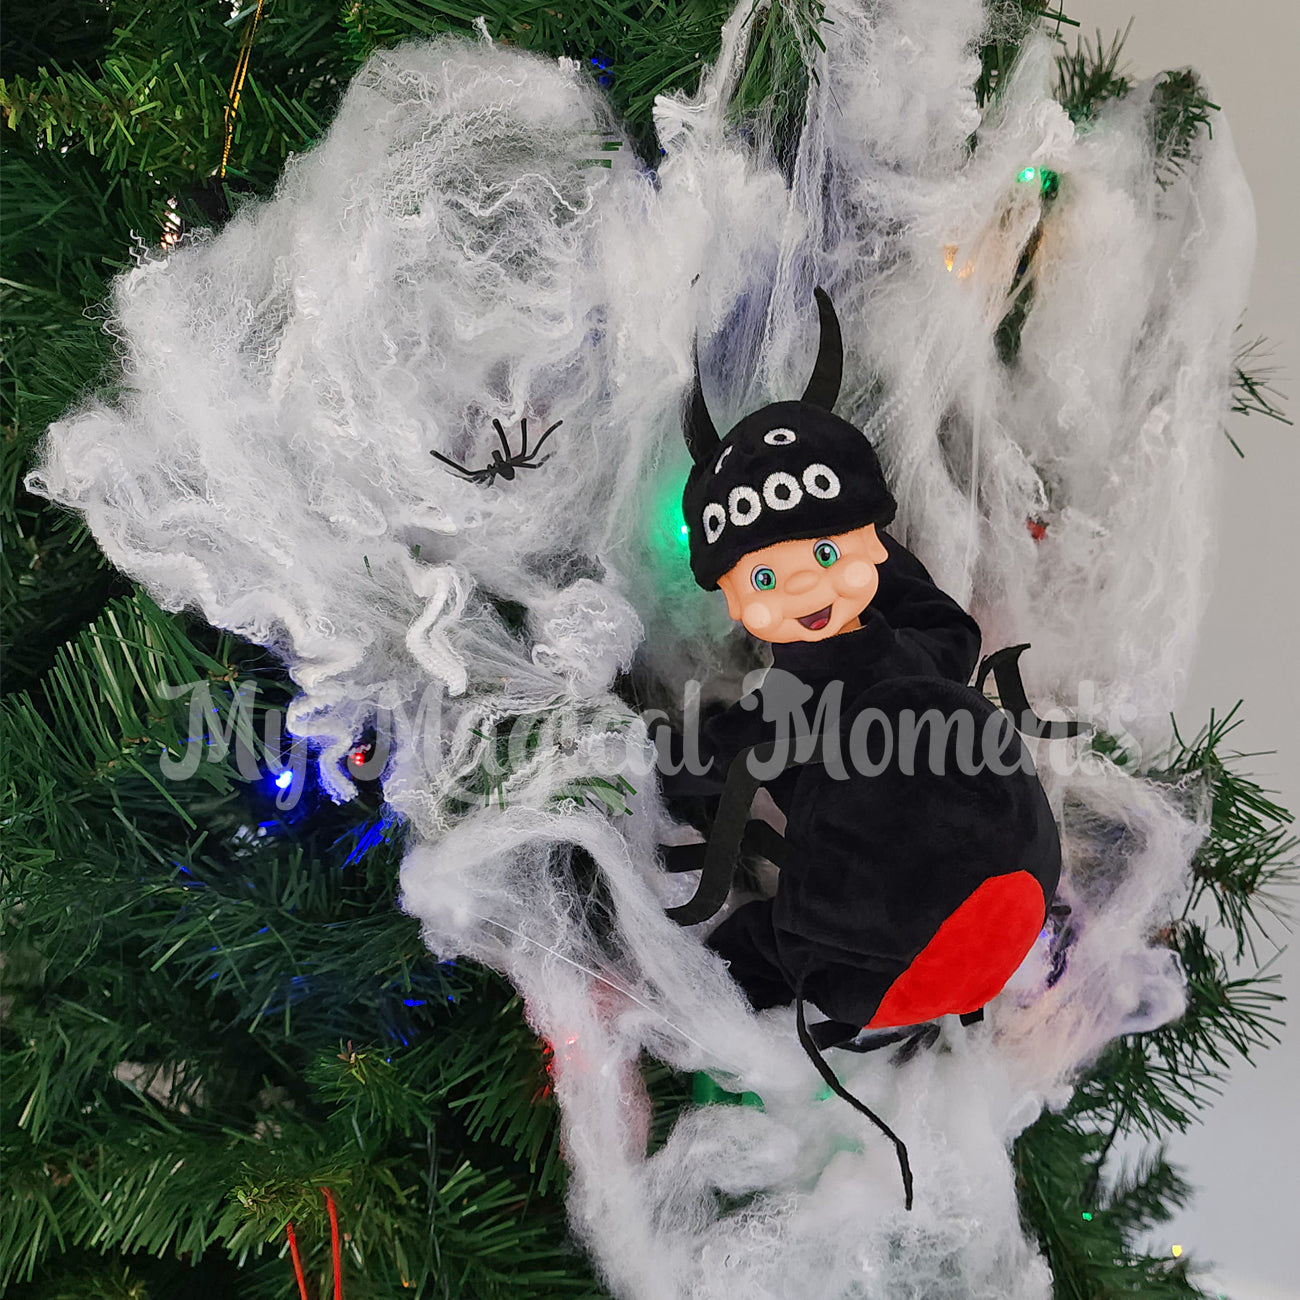 my elf friends dressed as a spider in a spider web in the tree with miniature fly props